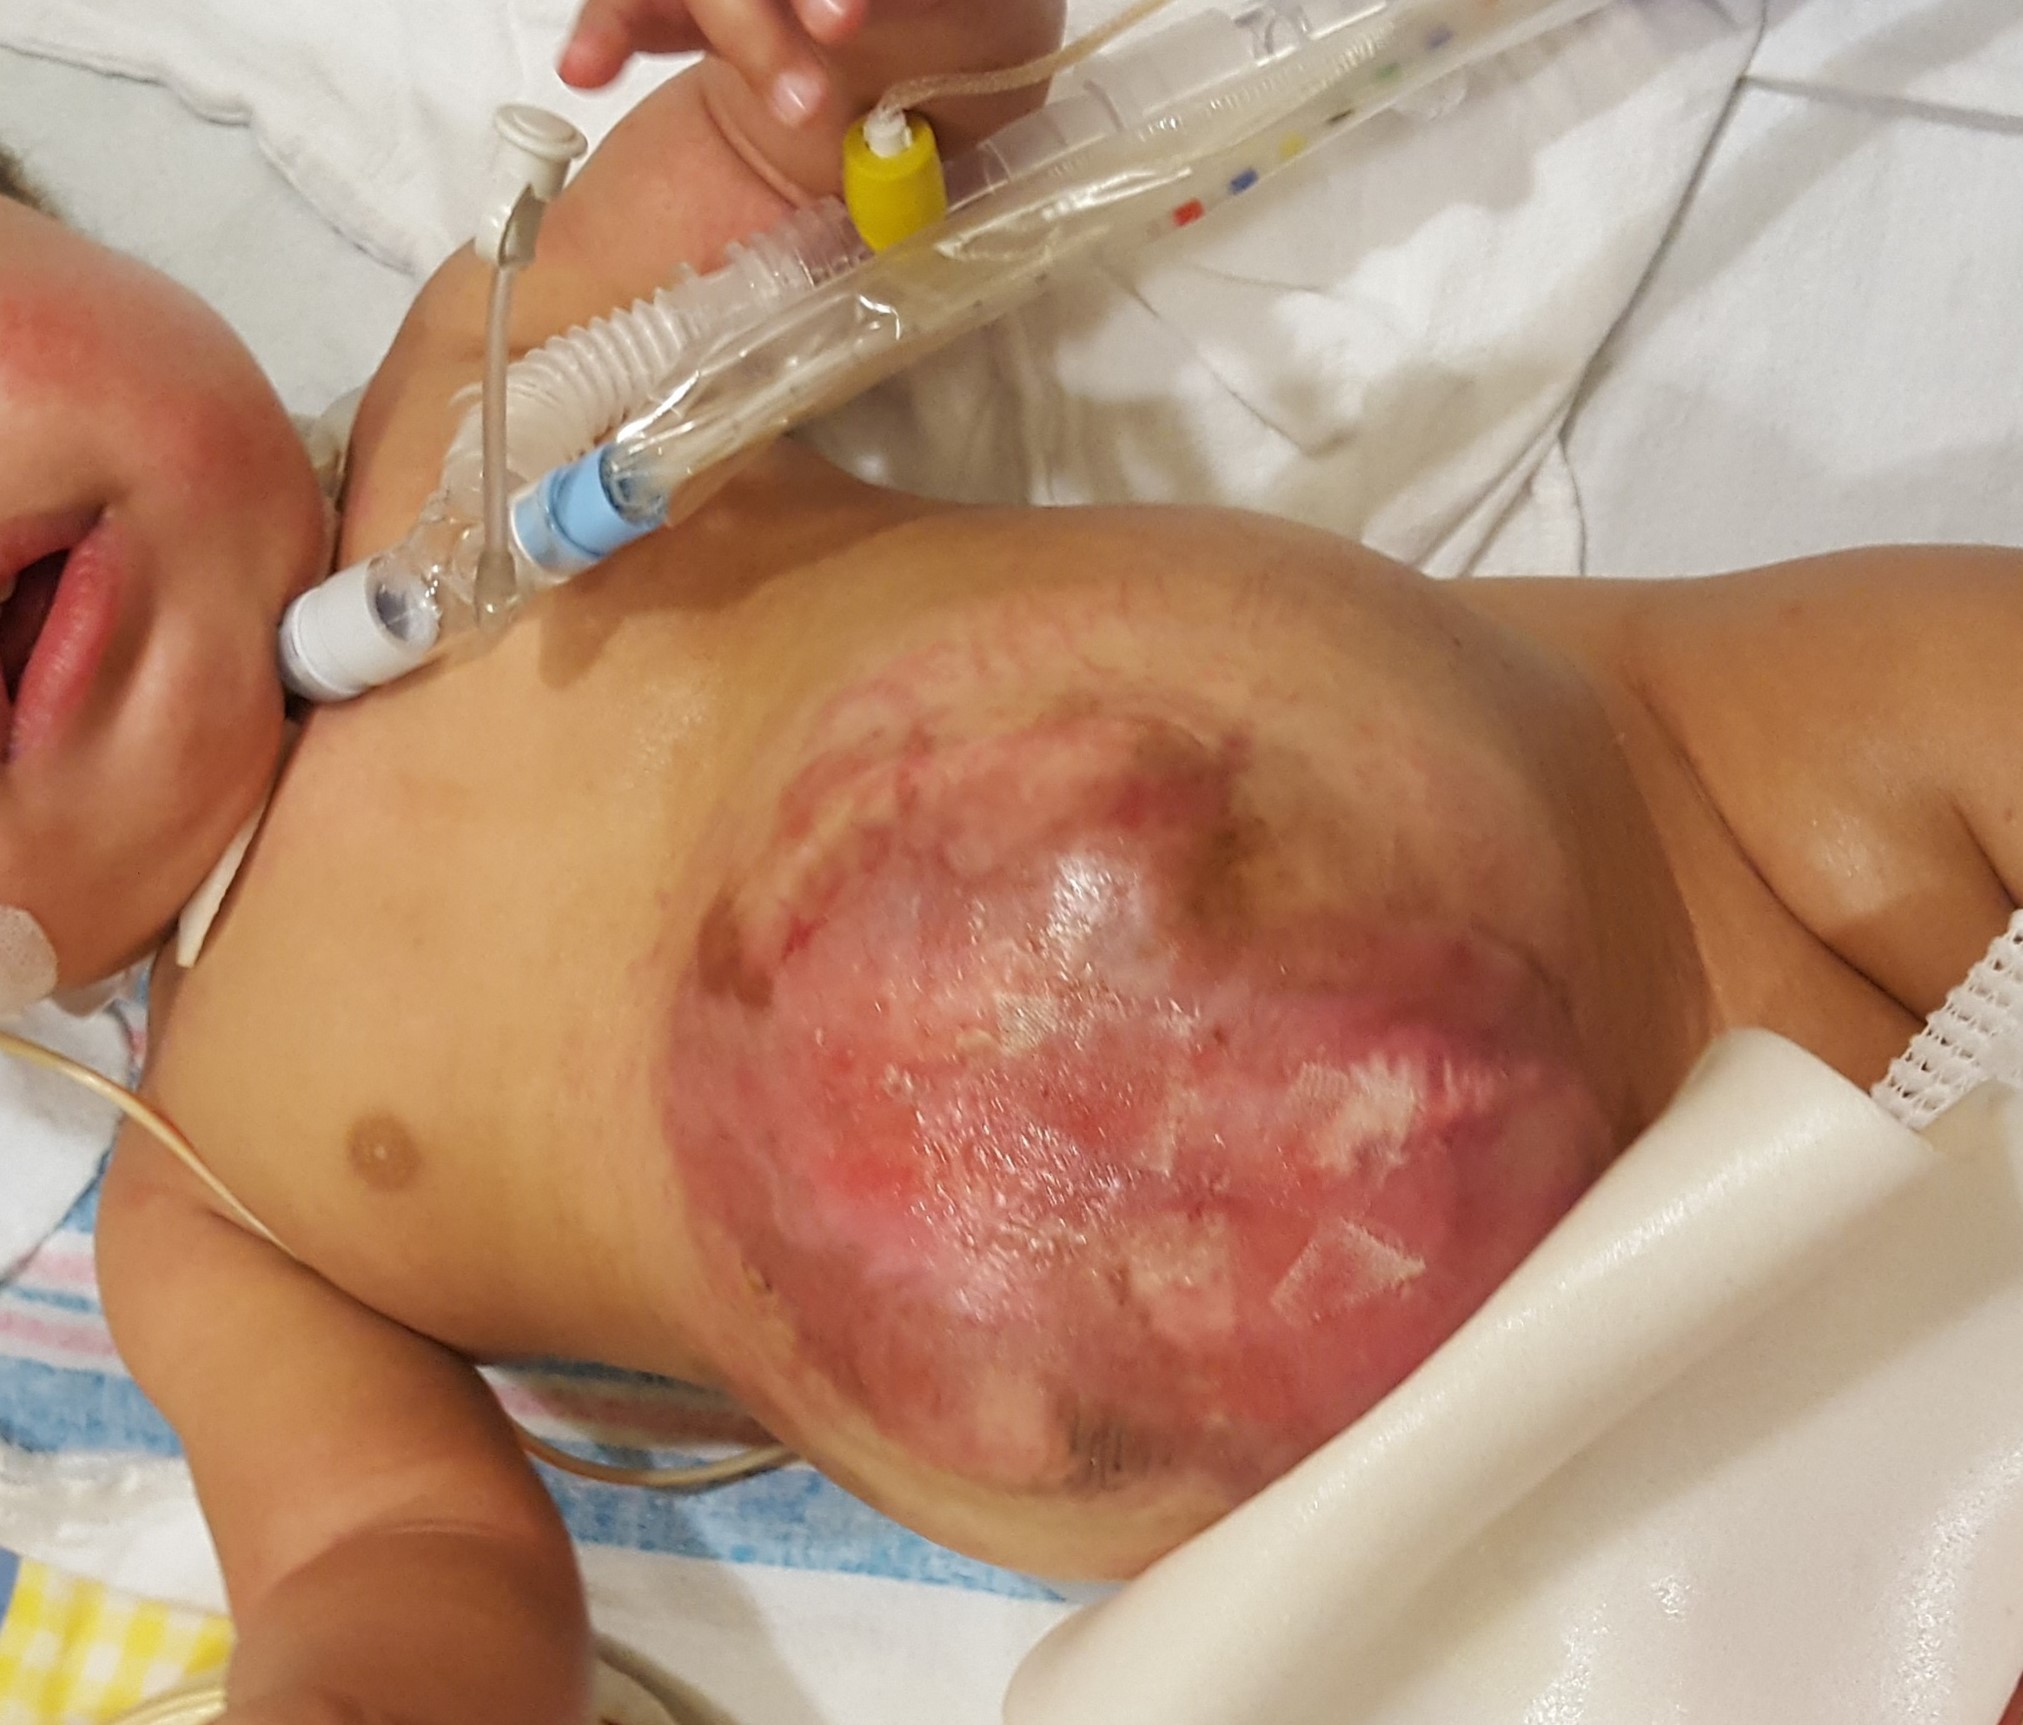 Fig. 2. Infant with omphalocele prior to application of overlying skin with wheatgrass extract.